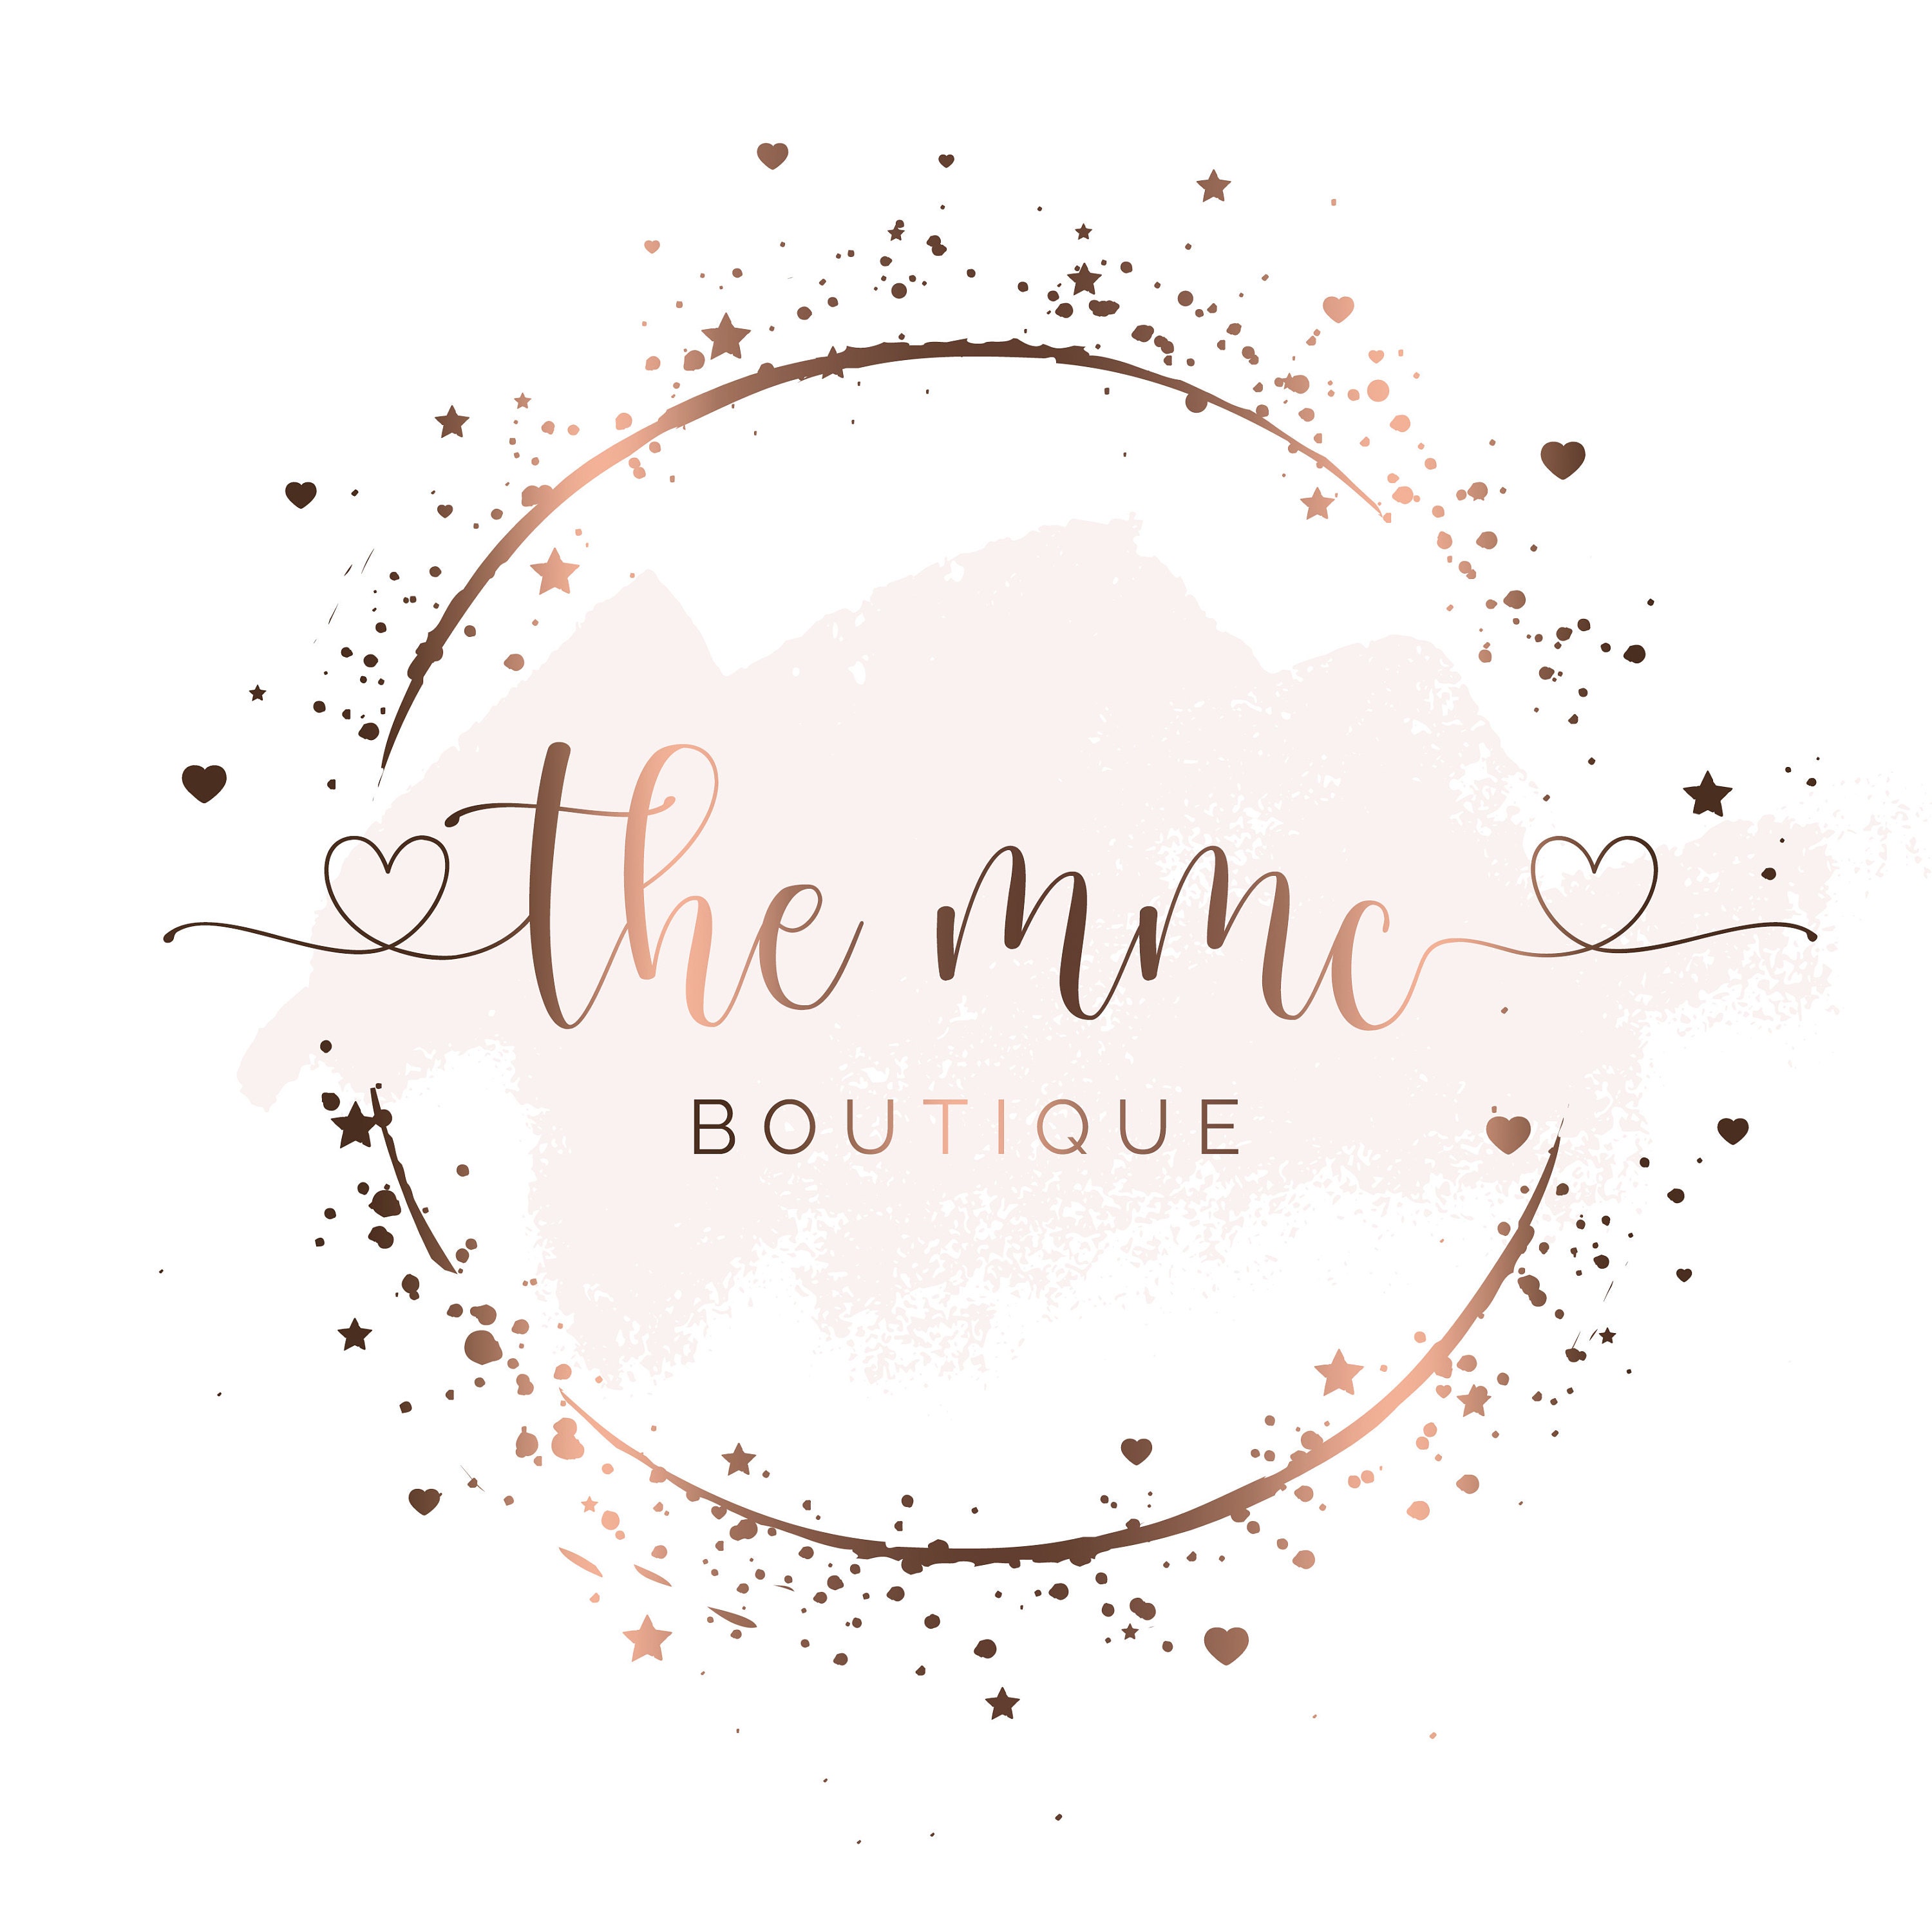 TheMMCBoutique - Etsy